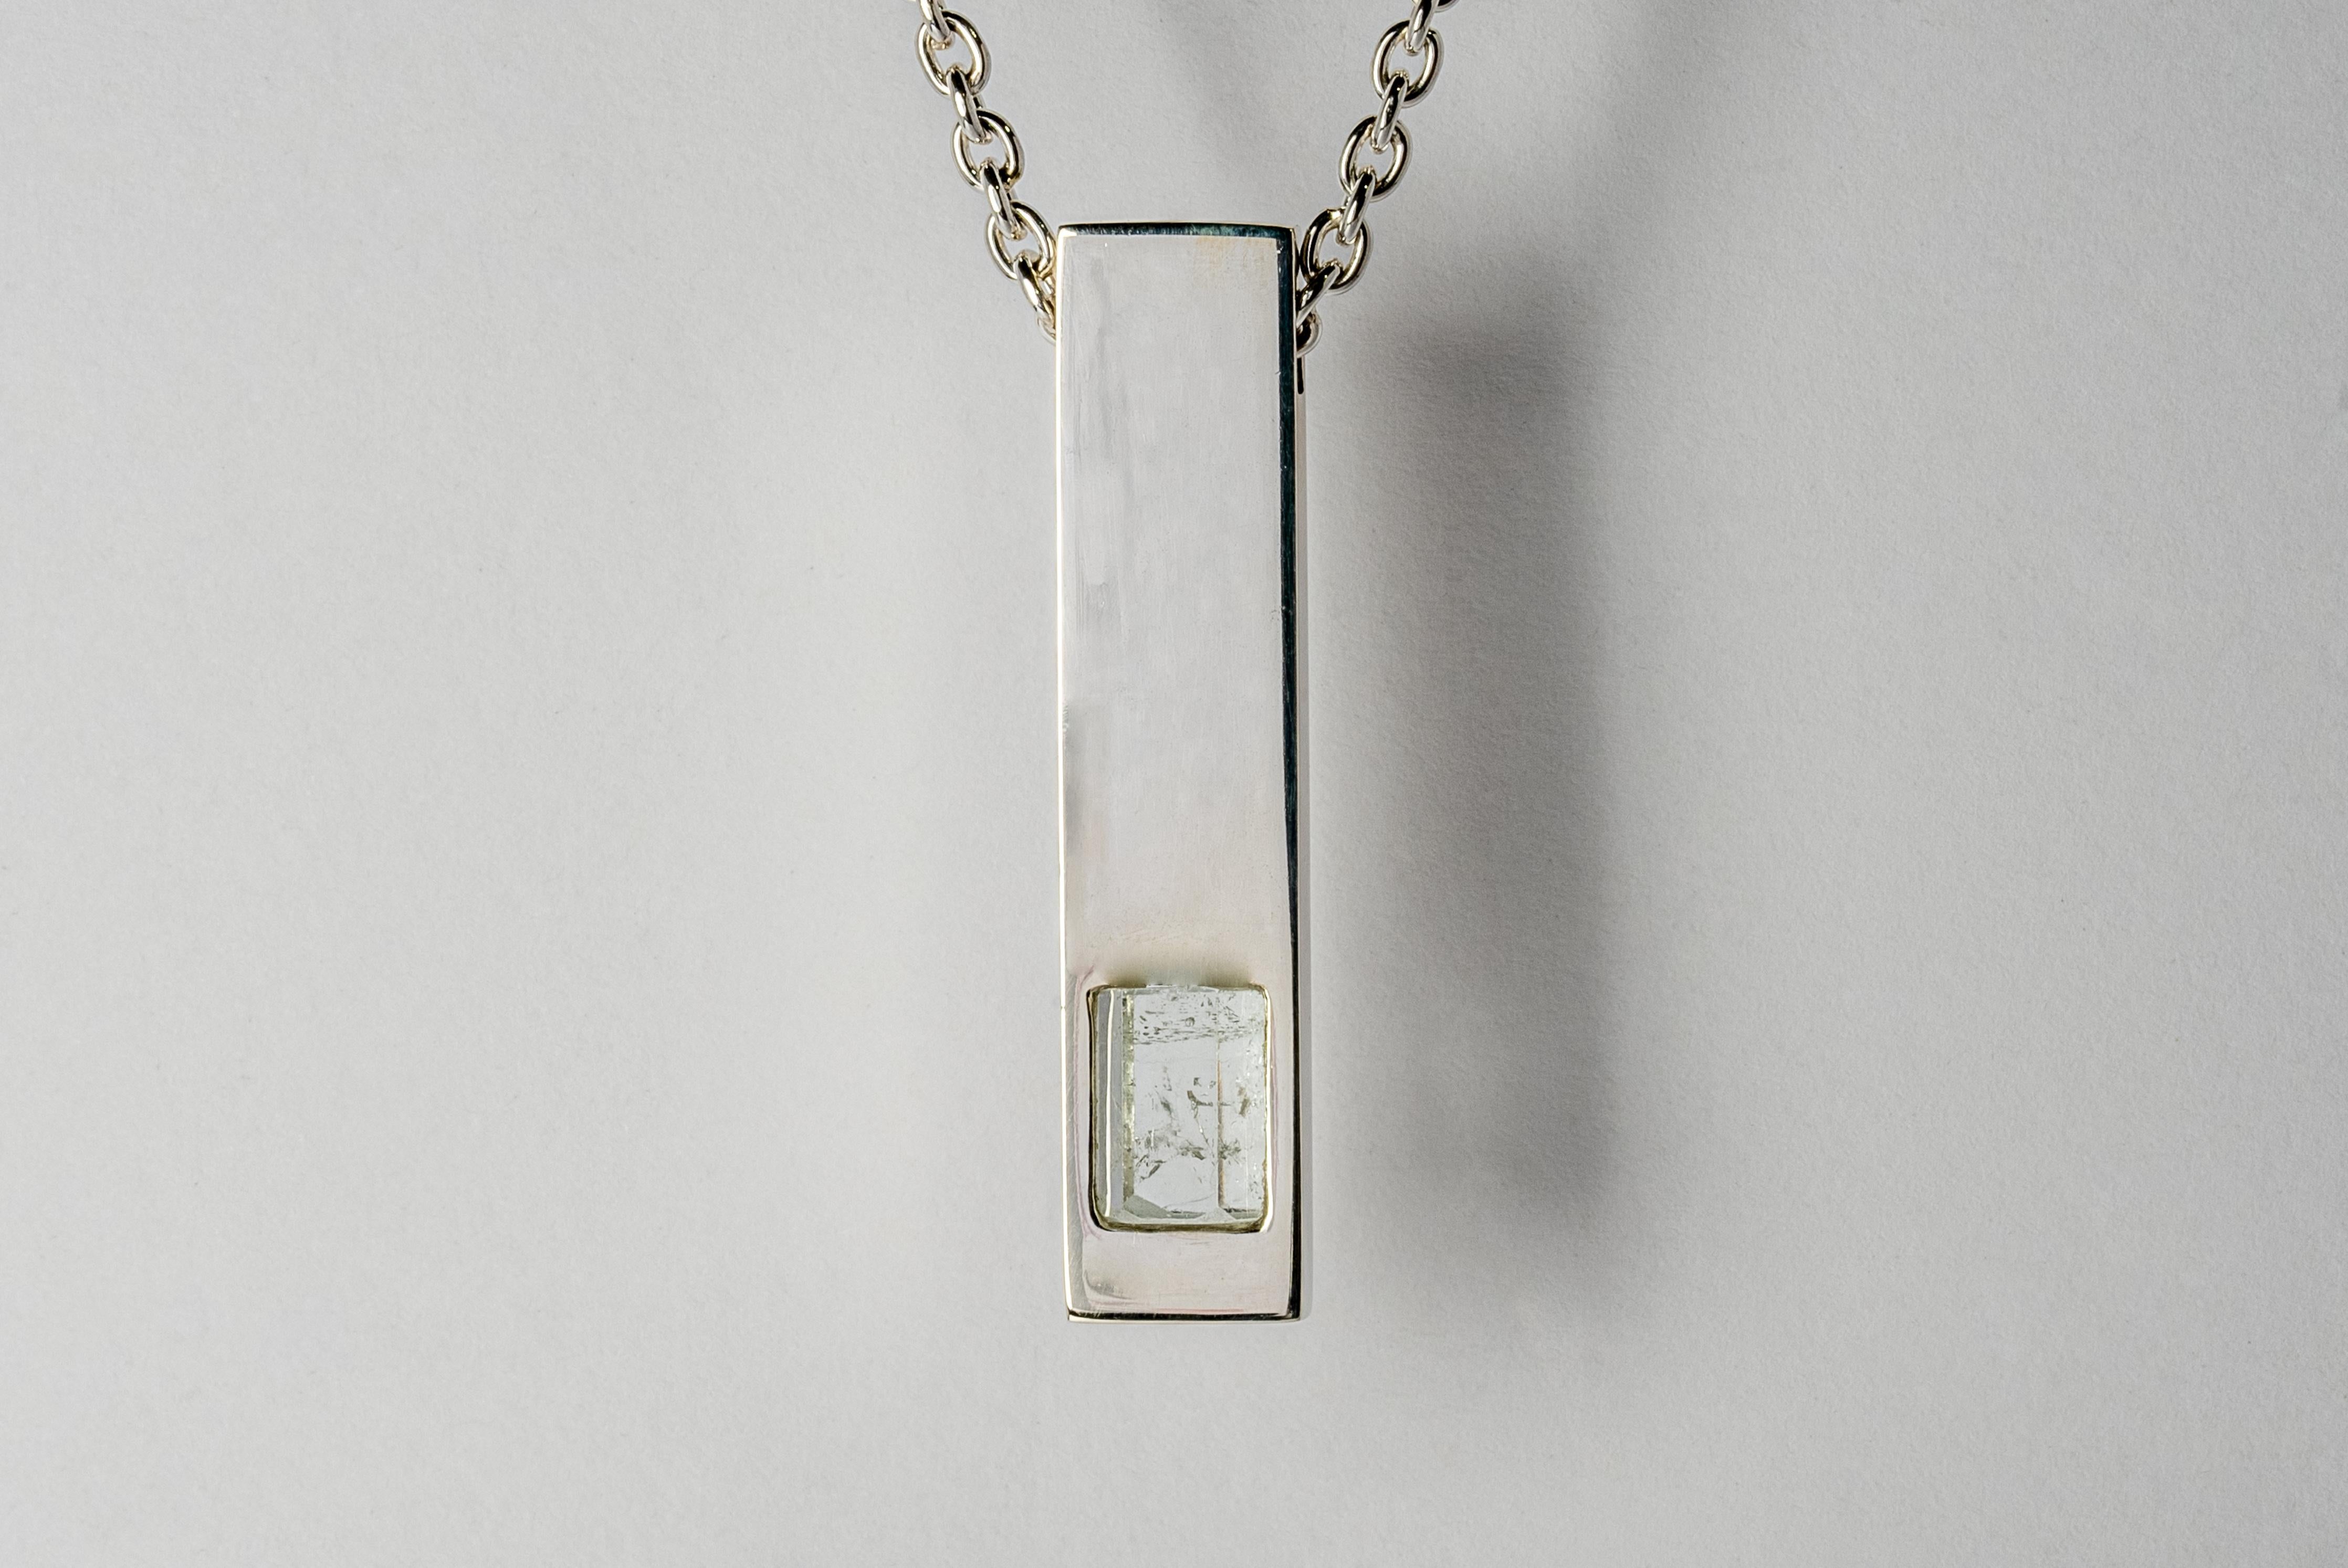 Pendant necklace in the shape of cuboid made in polished sterling silver and a slab of rough aquamarine. The Amulet series seeks to encapsulate the energy of a mineral element(s). This family is a branch from the Talisman family and seeks to further